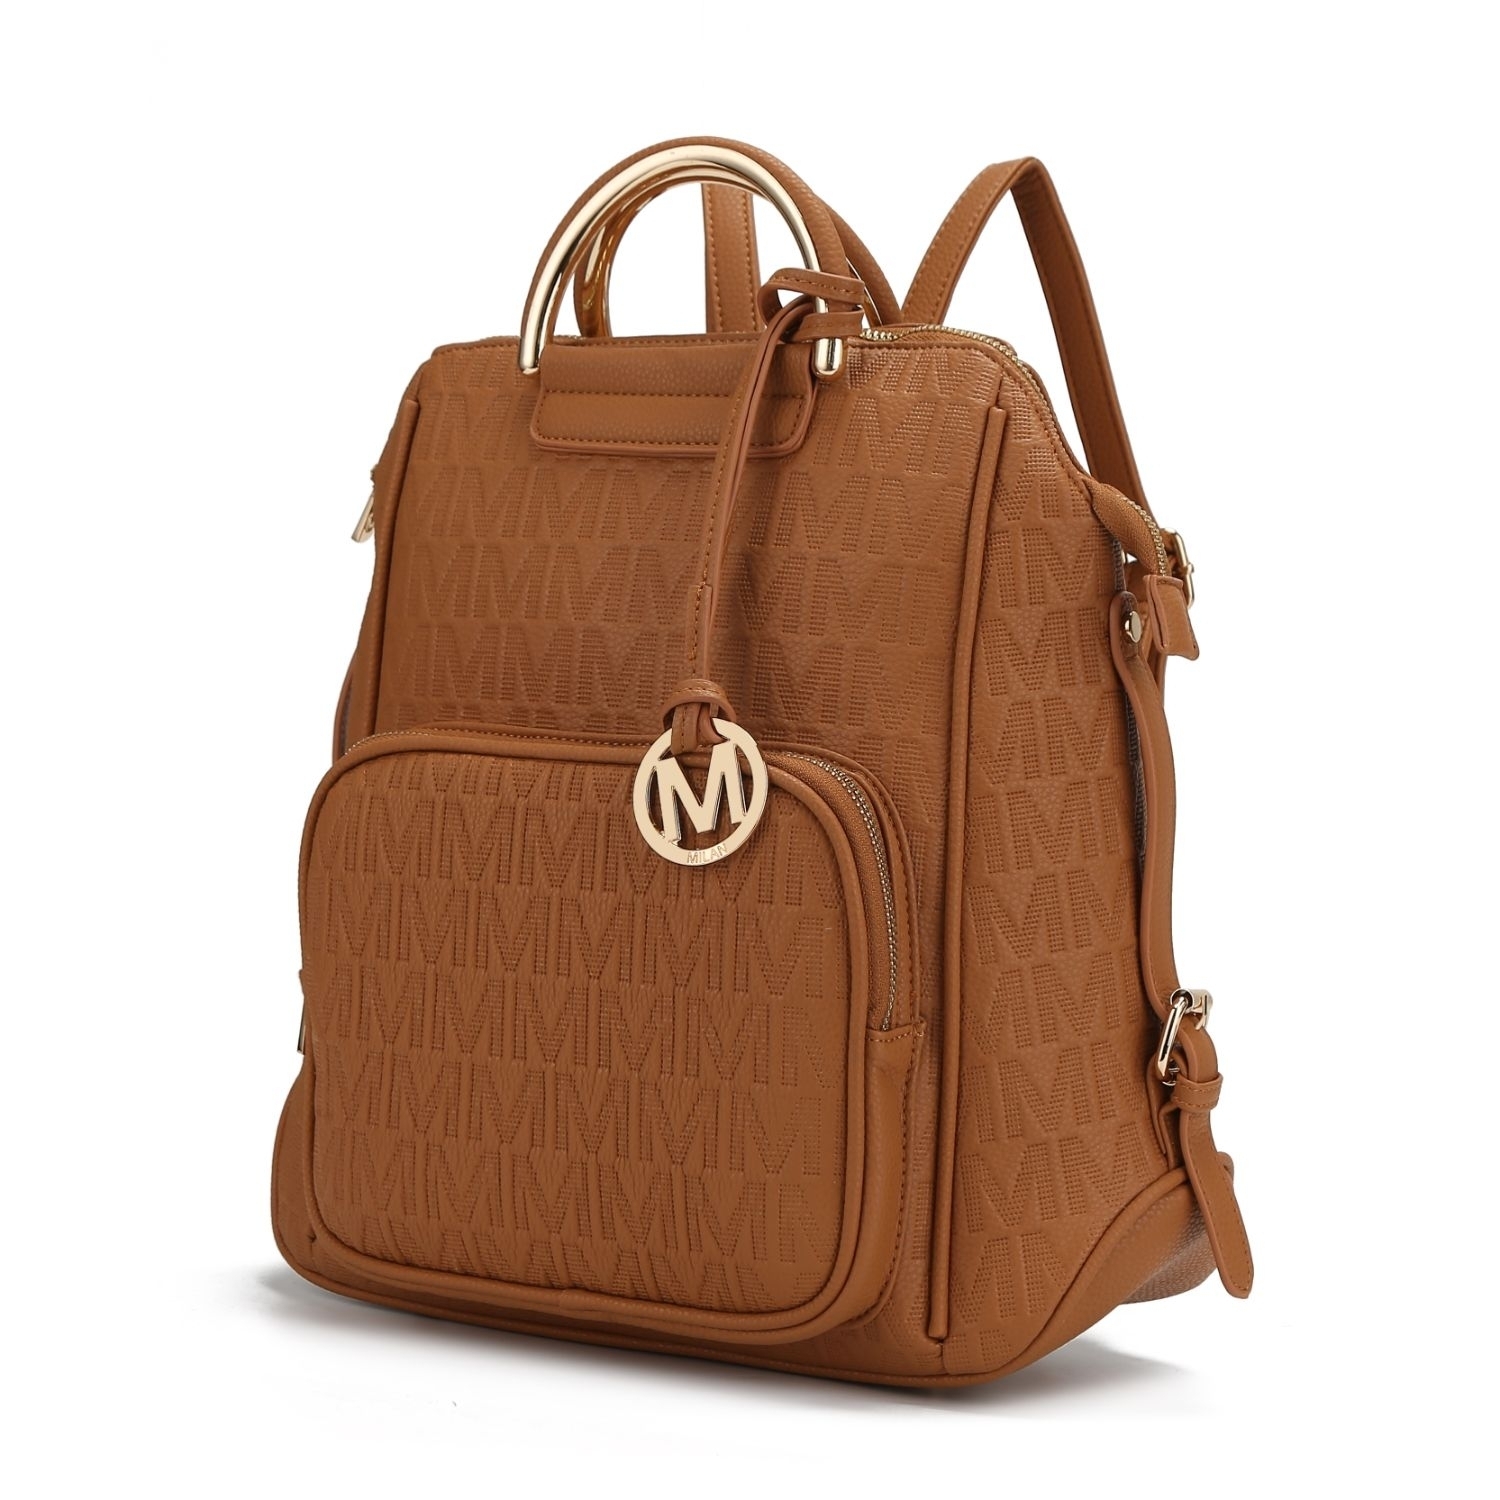 MKF Collection Torra Milan .M. Signature Trendy Backpack By Mia K. - Tan